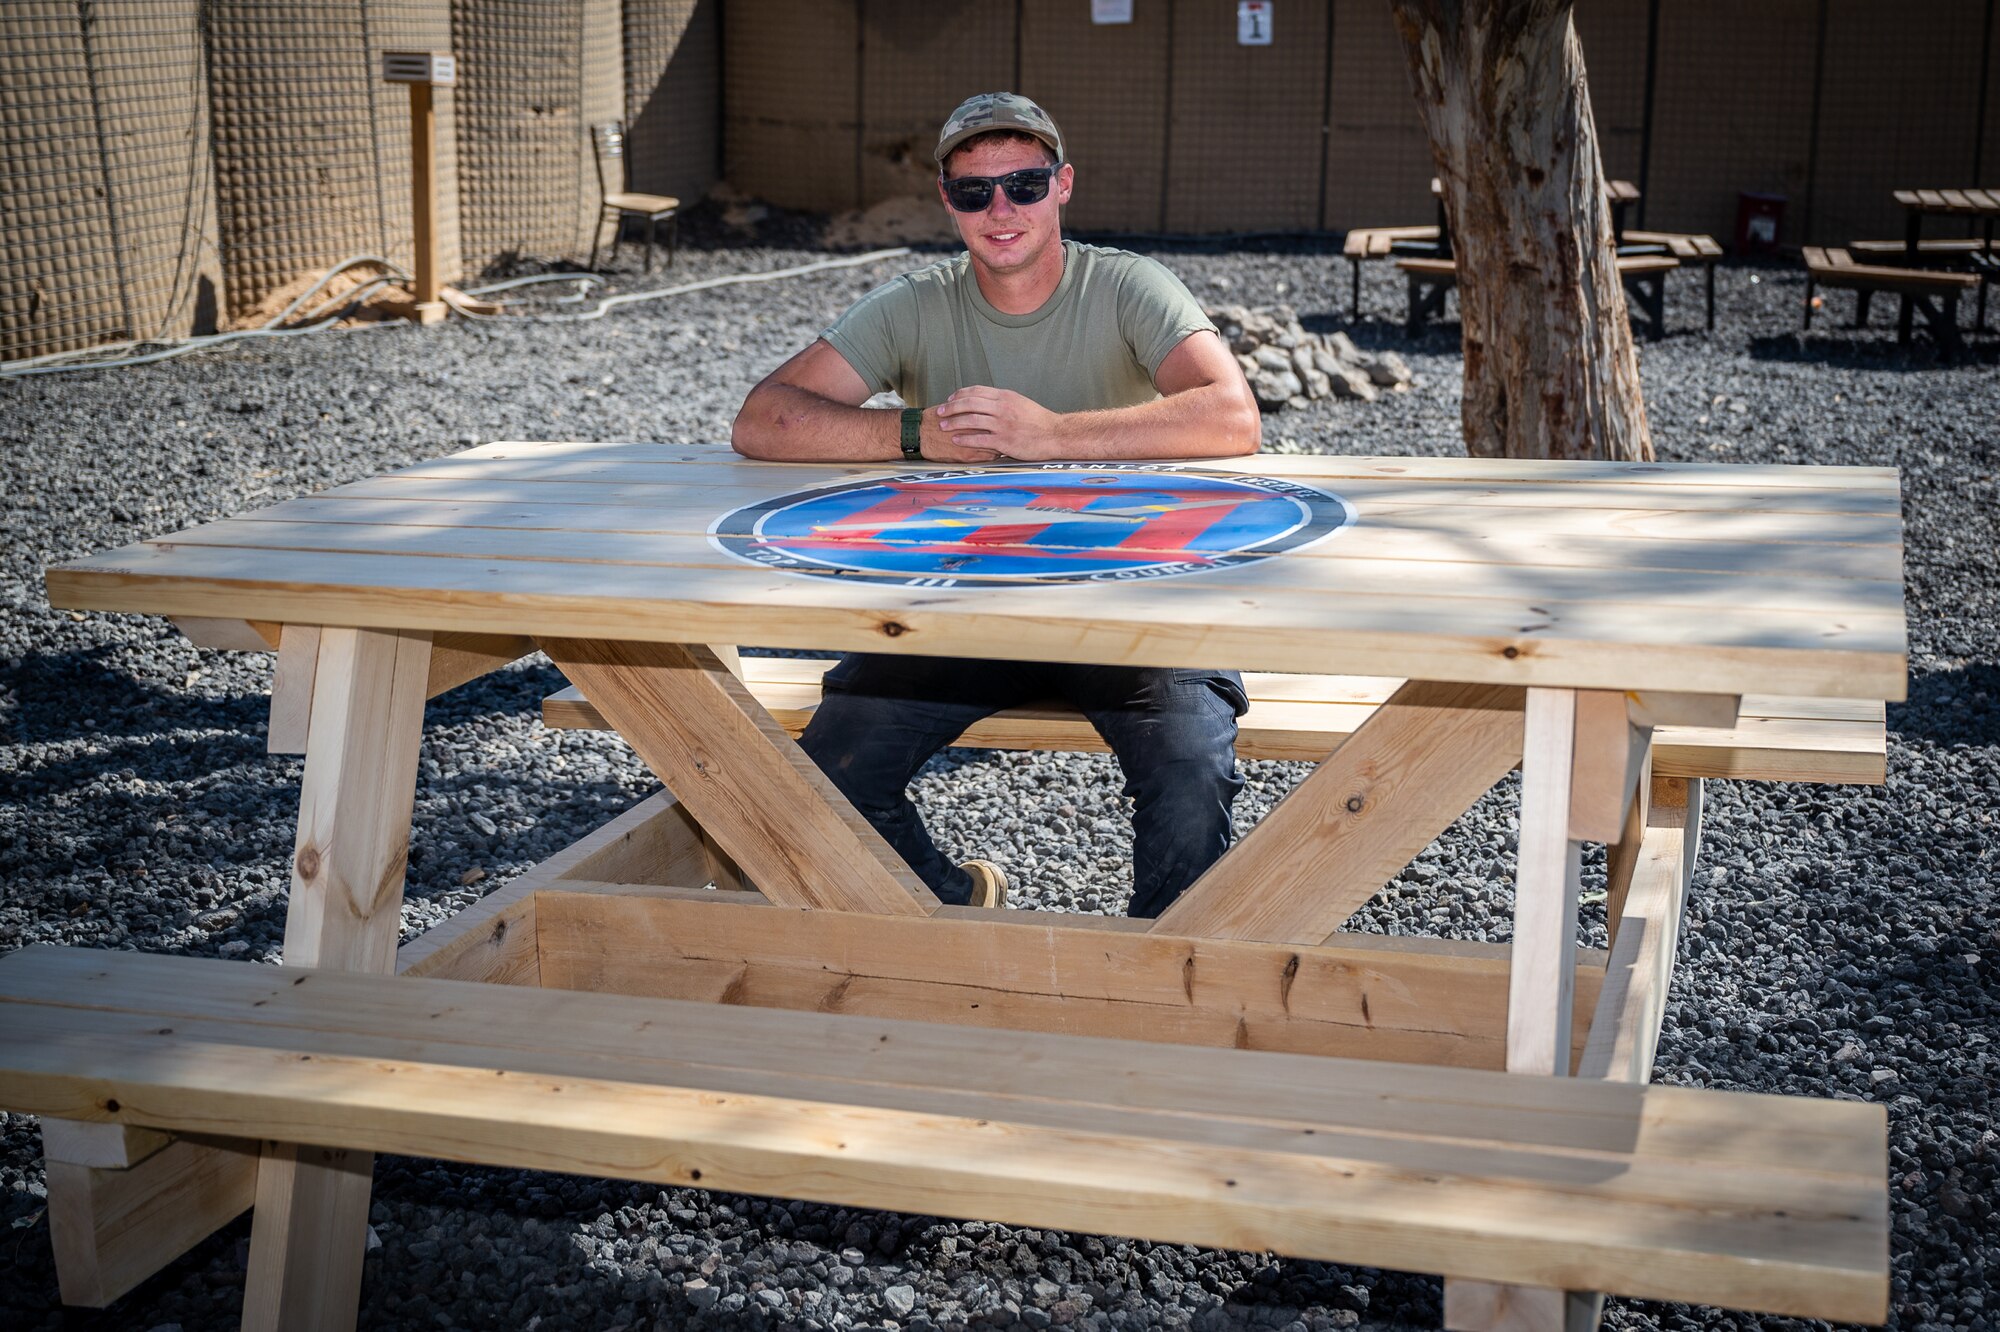 Airman First Class Bryson Doll, 332d Expeditionary Civil Engineer Squadron structural apprentice, sits at the picnic table he designed, built, and painted for the 332d Air Expeditionary Wing Top III Council at an undisclosed location in Southwest Asia, May 18, 2022. During his deployment, Doll has volunteered 50 hours, before and after work, on various woodworking projects that include bag toss boards, a bench crafted from a shipping palate, a picnic table, a tail fin coin holder, and several other projects. (U.S. Air Force photo by Master Sgt. Christopher Parr)